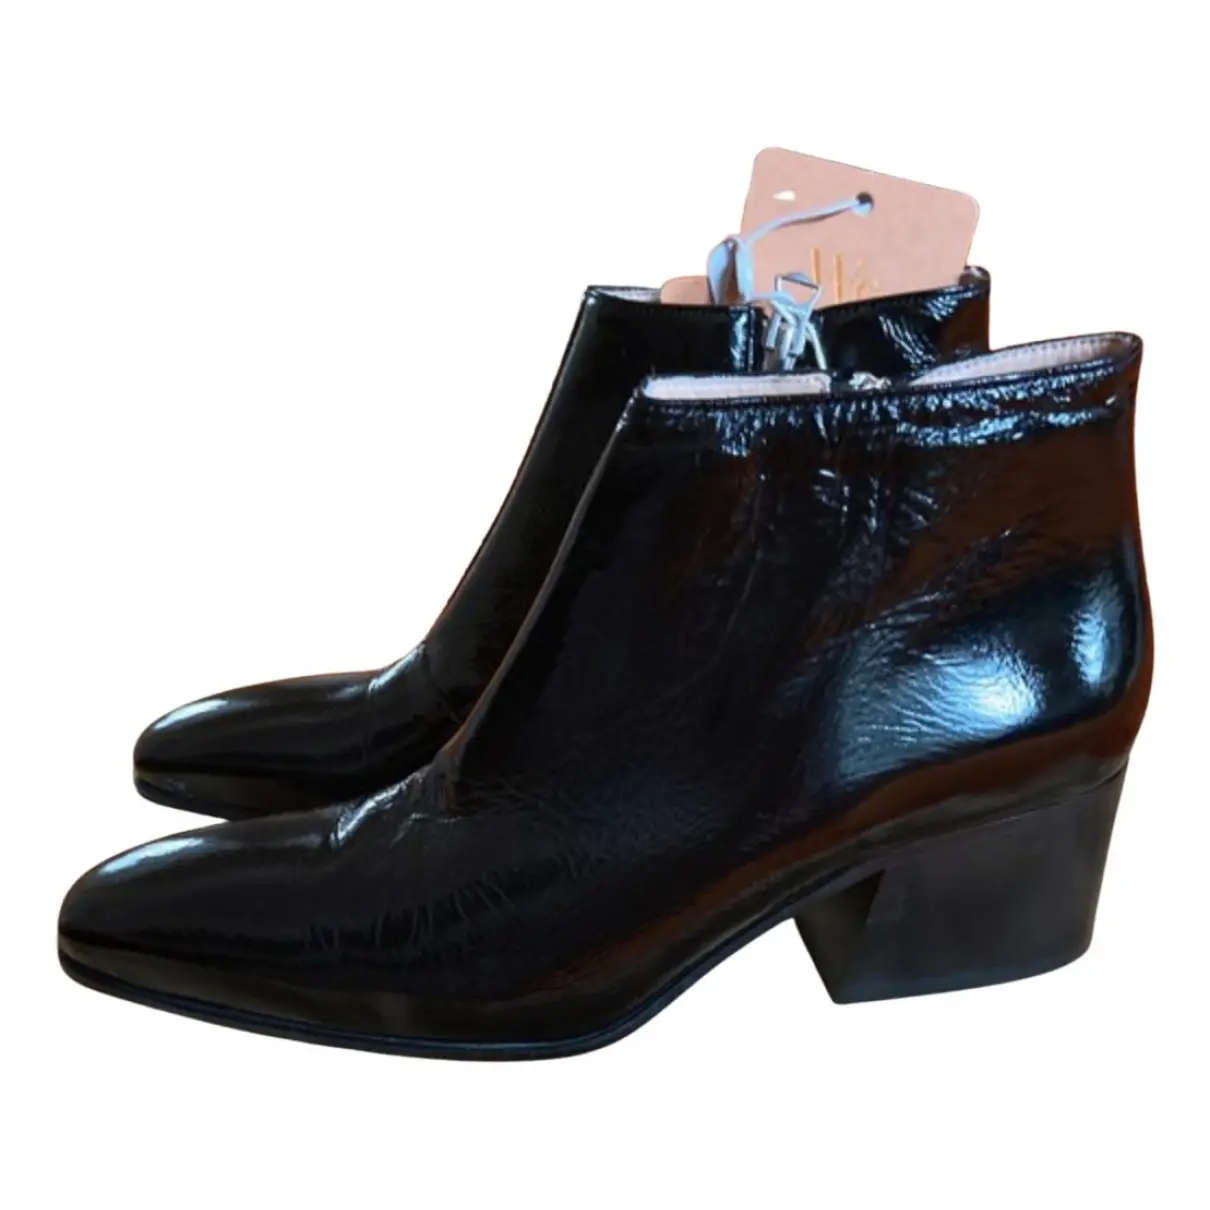 Patent leather western boots Acne Studios